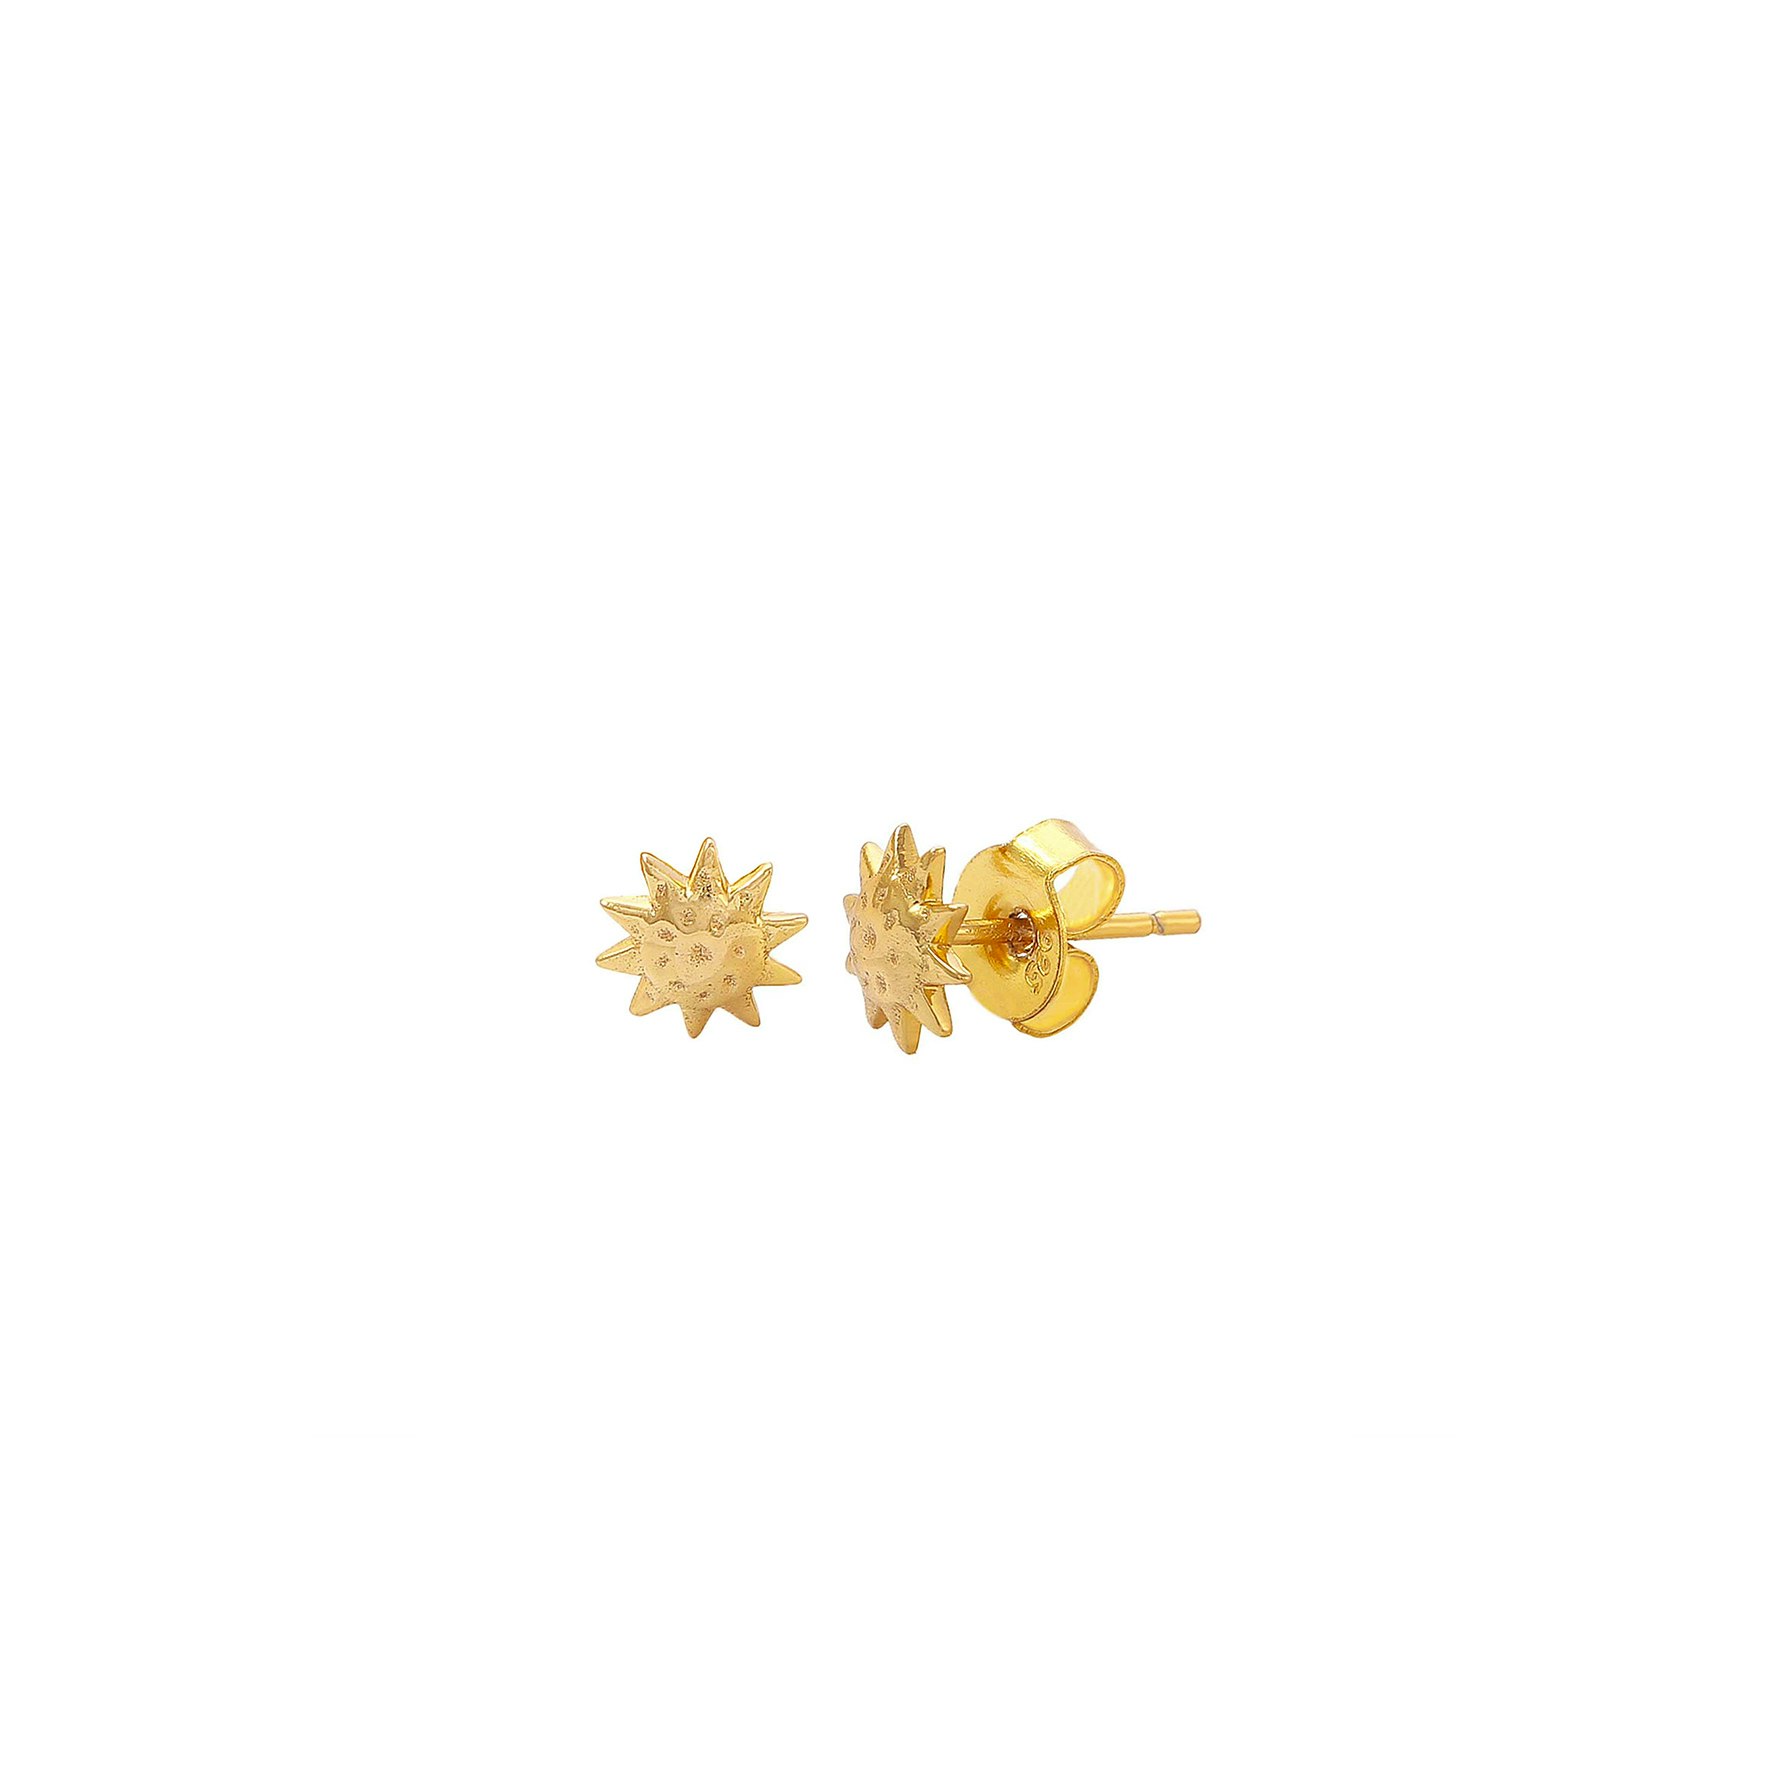 Apollo Studs from Hultquist Copenhagen in Goldplated-Silver Sterling 925